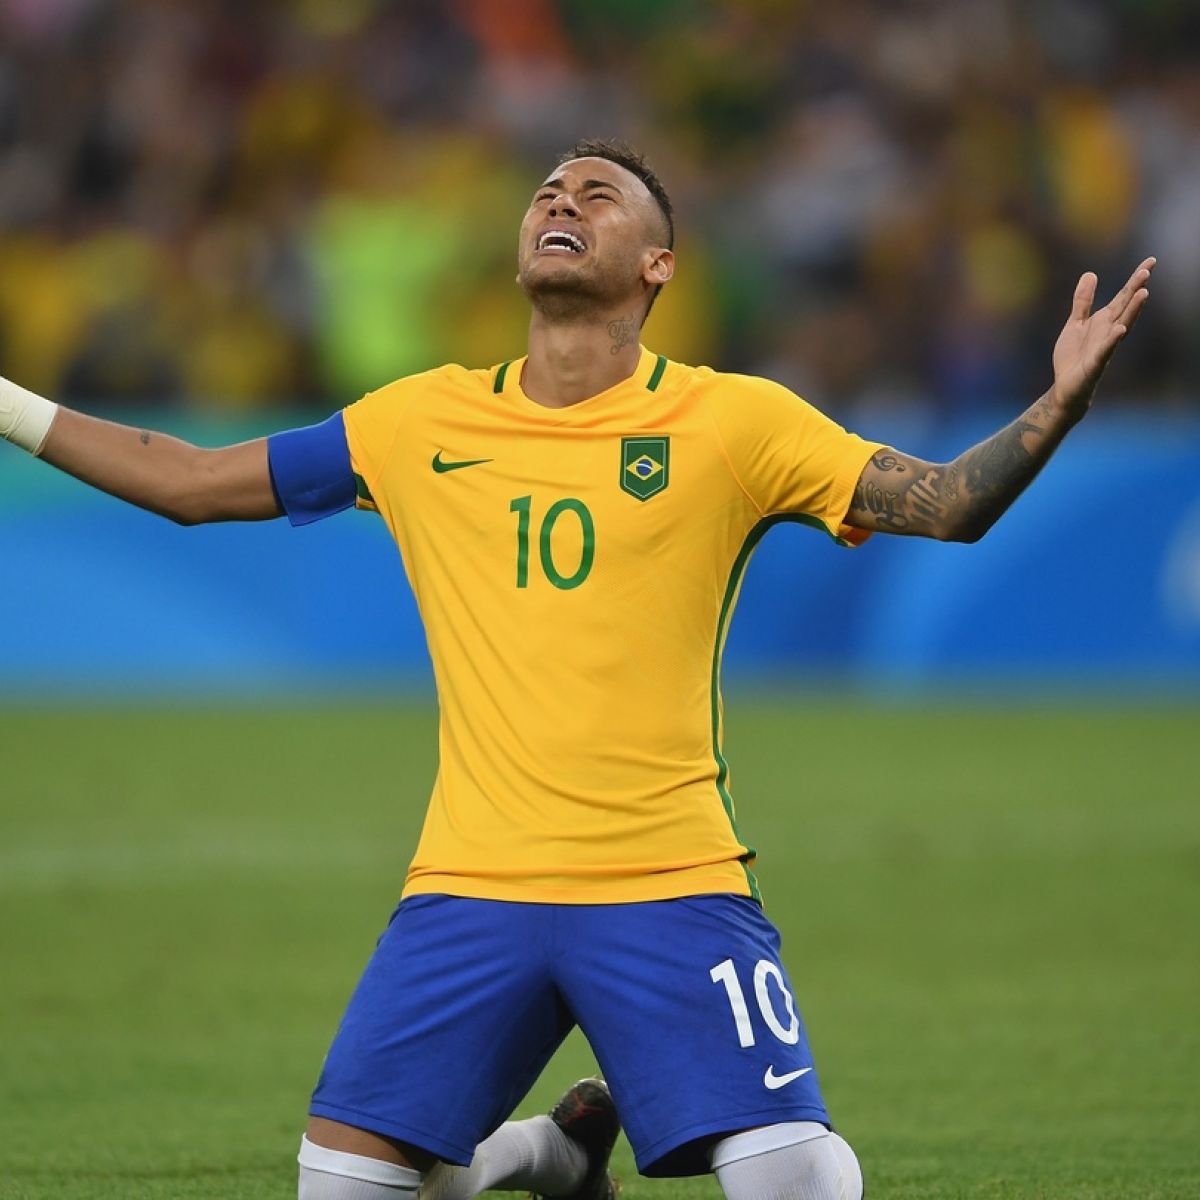 Plight Of Neymar A Familiar Worry For Brazil As World Cup Looms